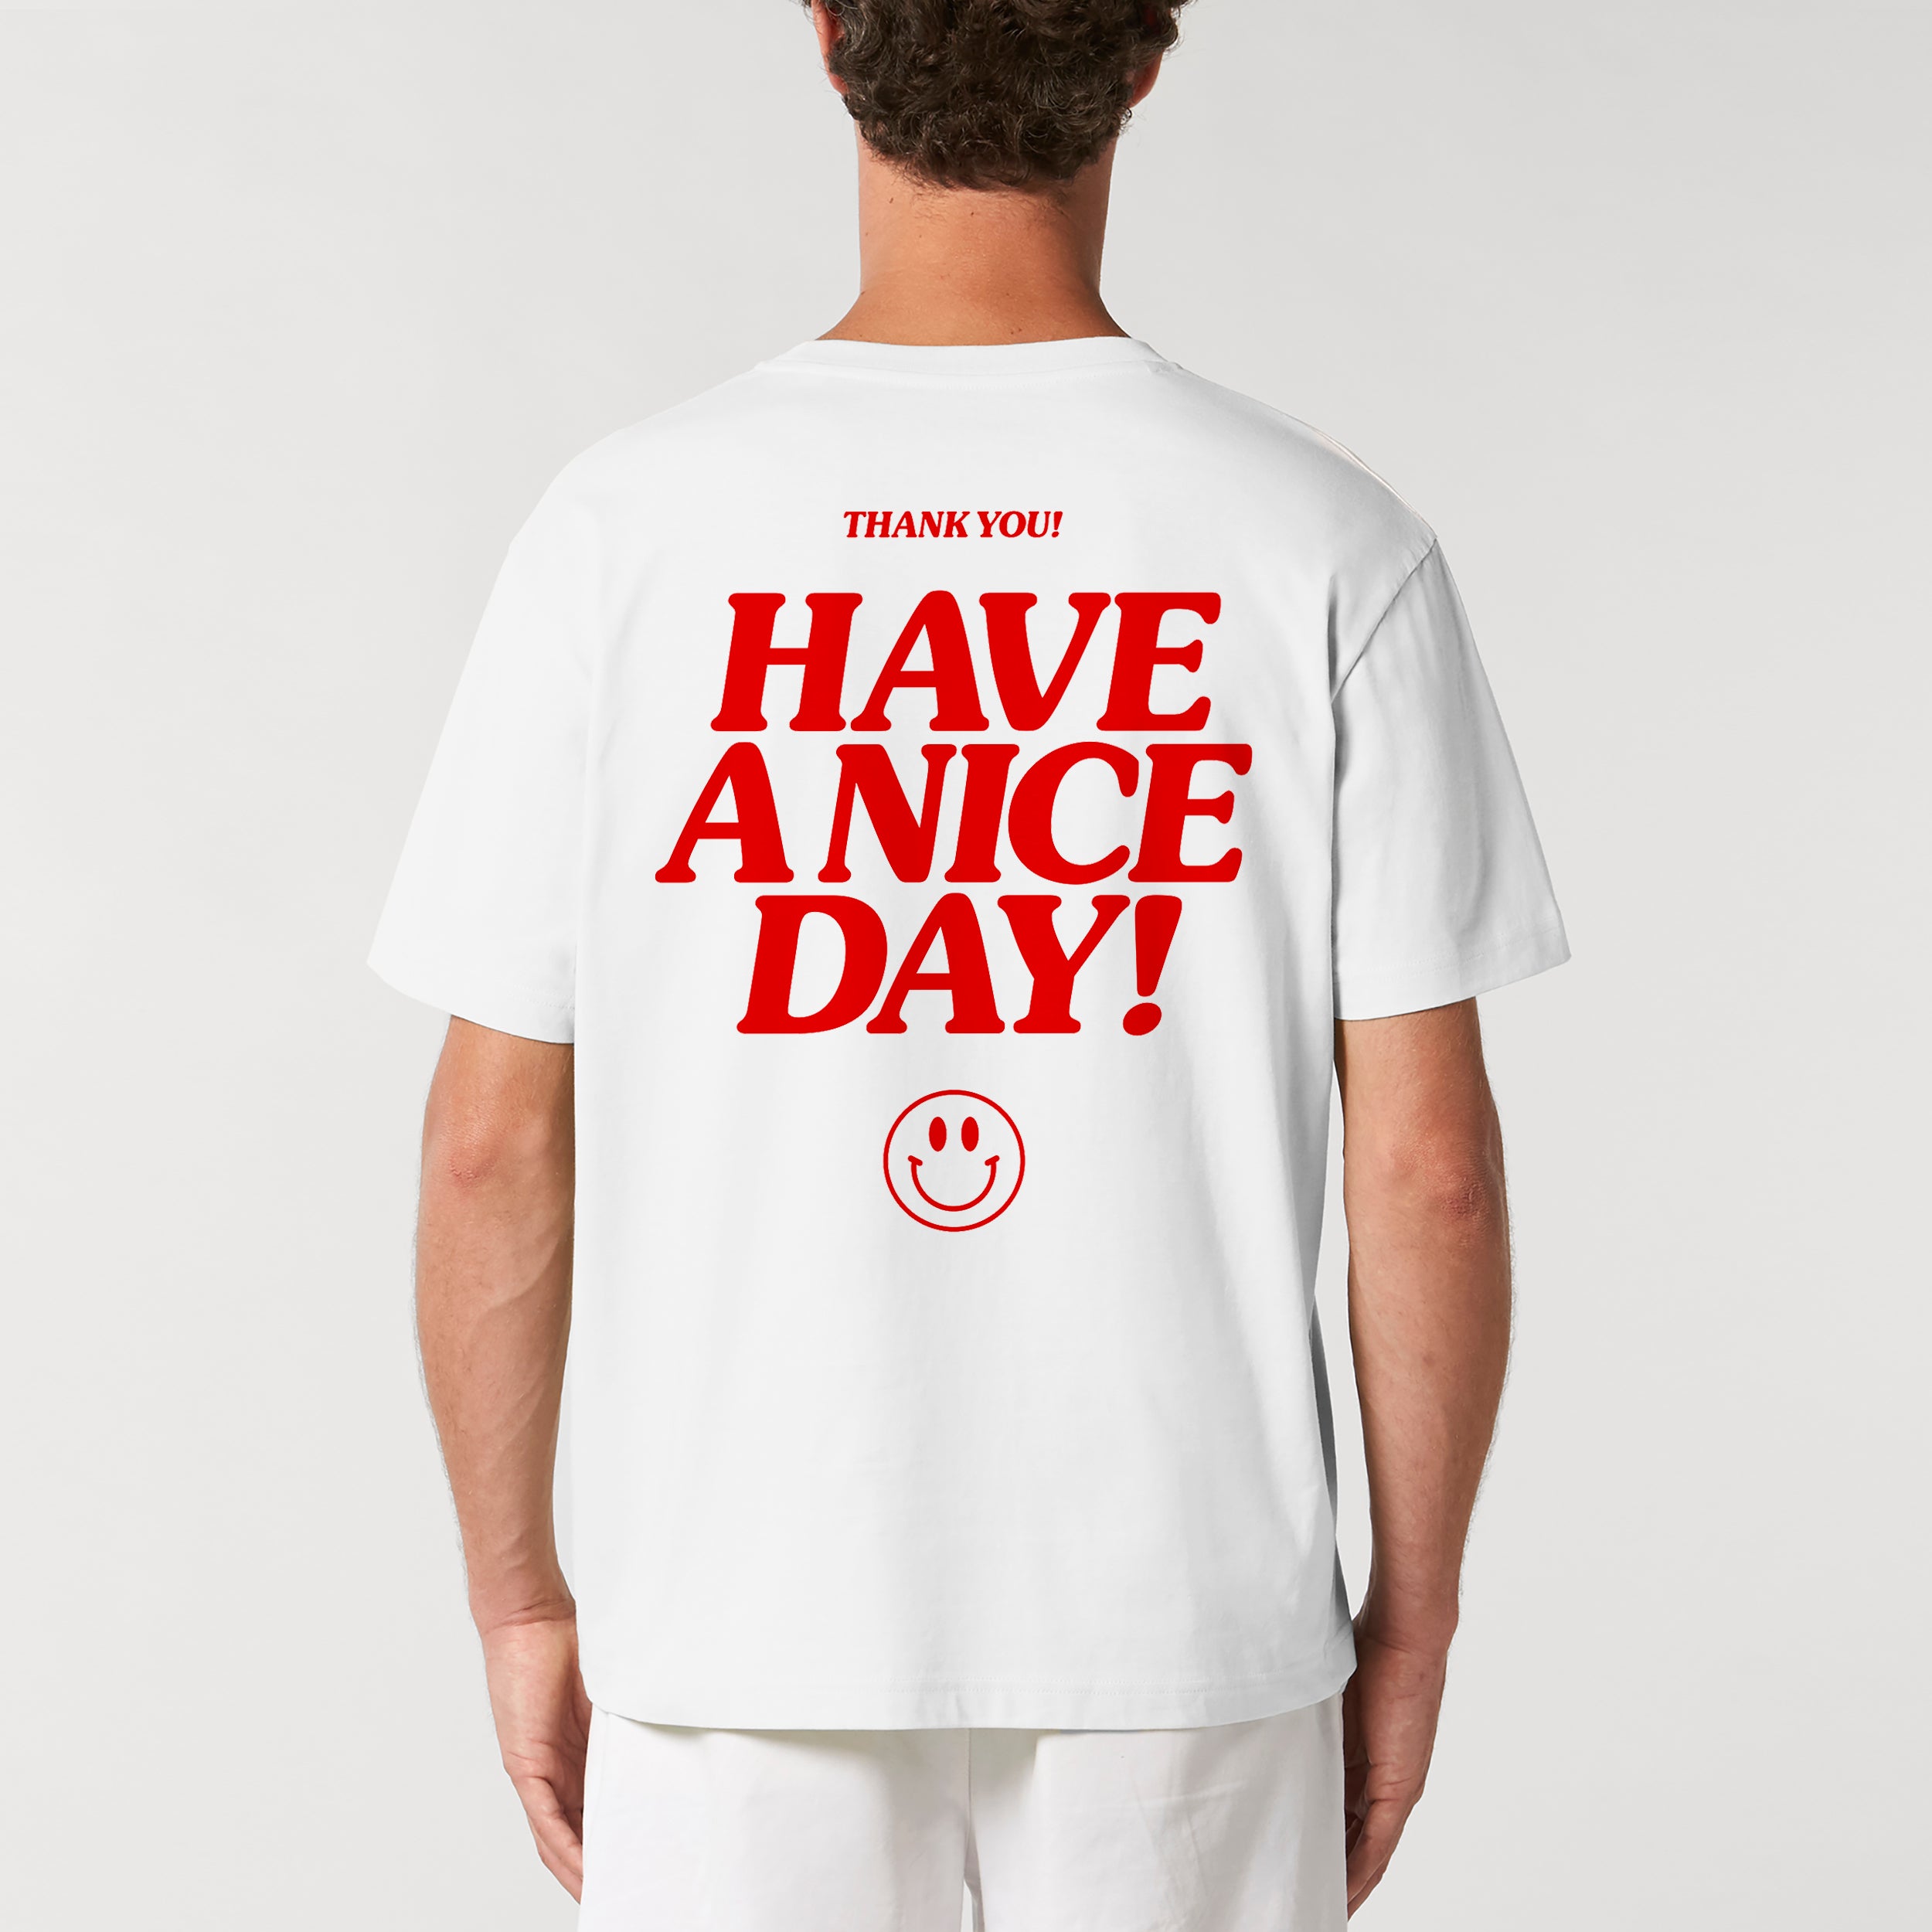 HAVE A DAY' T-Shirt – Goodie Works